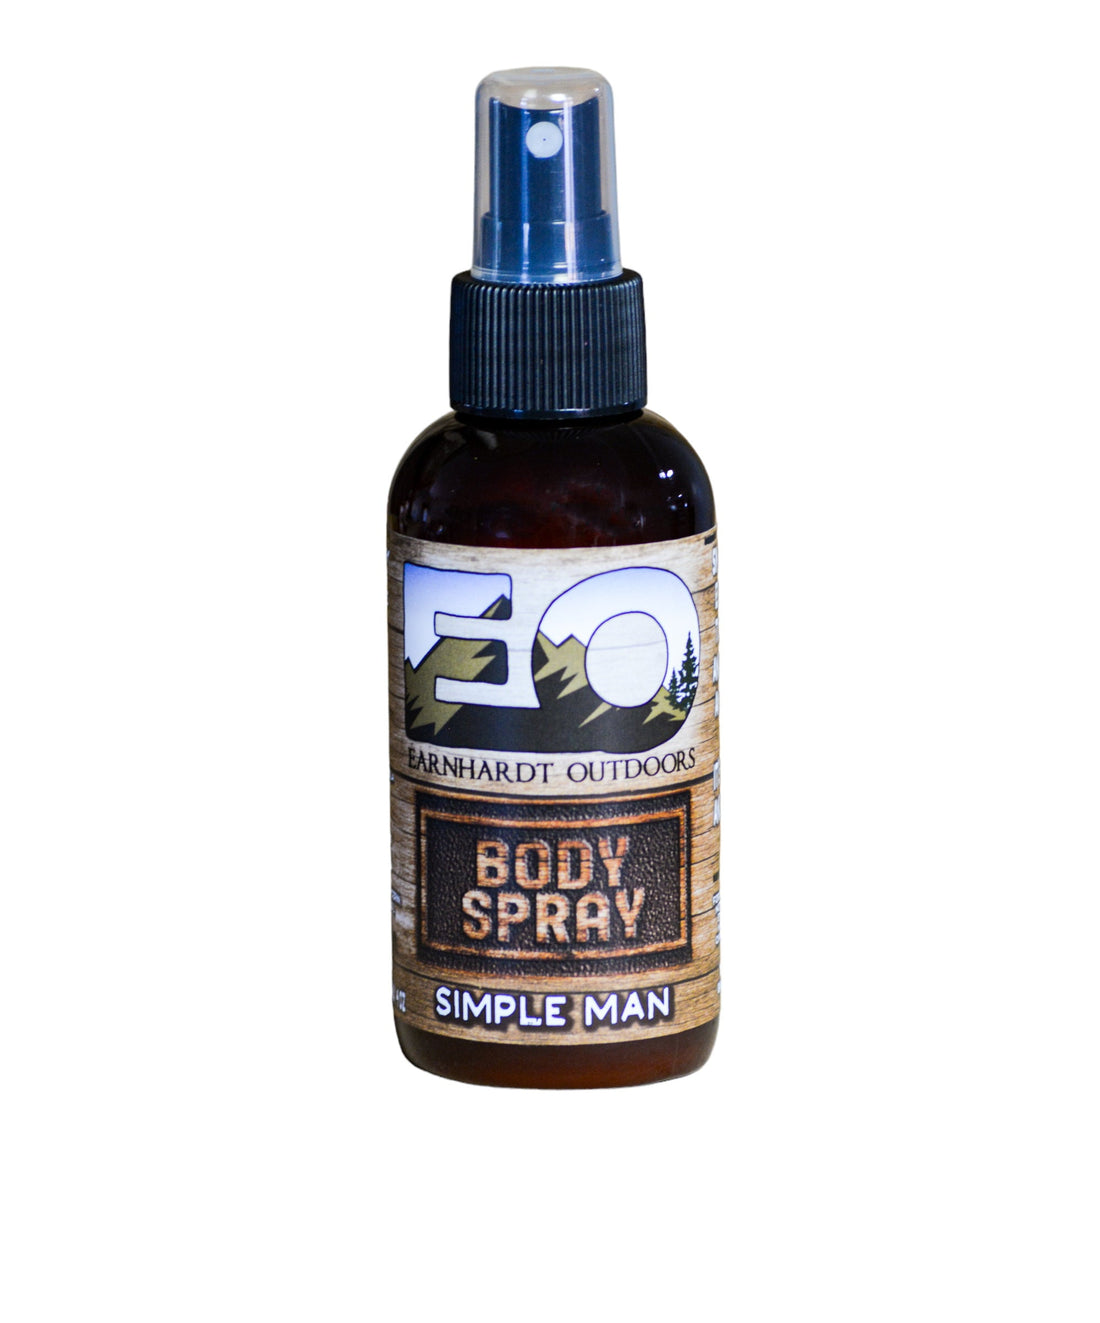 Simple Man Earnhardt Outdoors Body Spray - Old Town Soap Co.